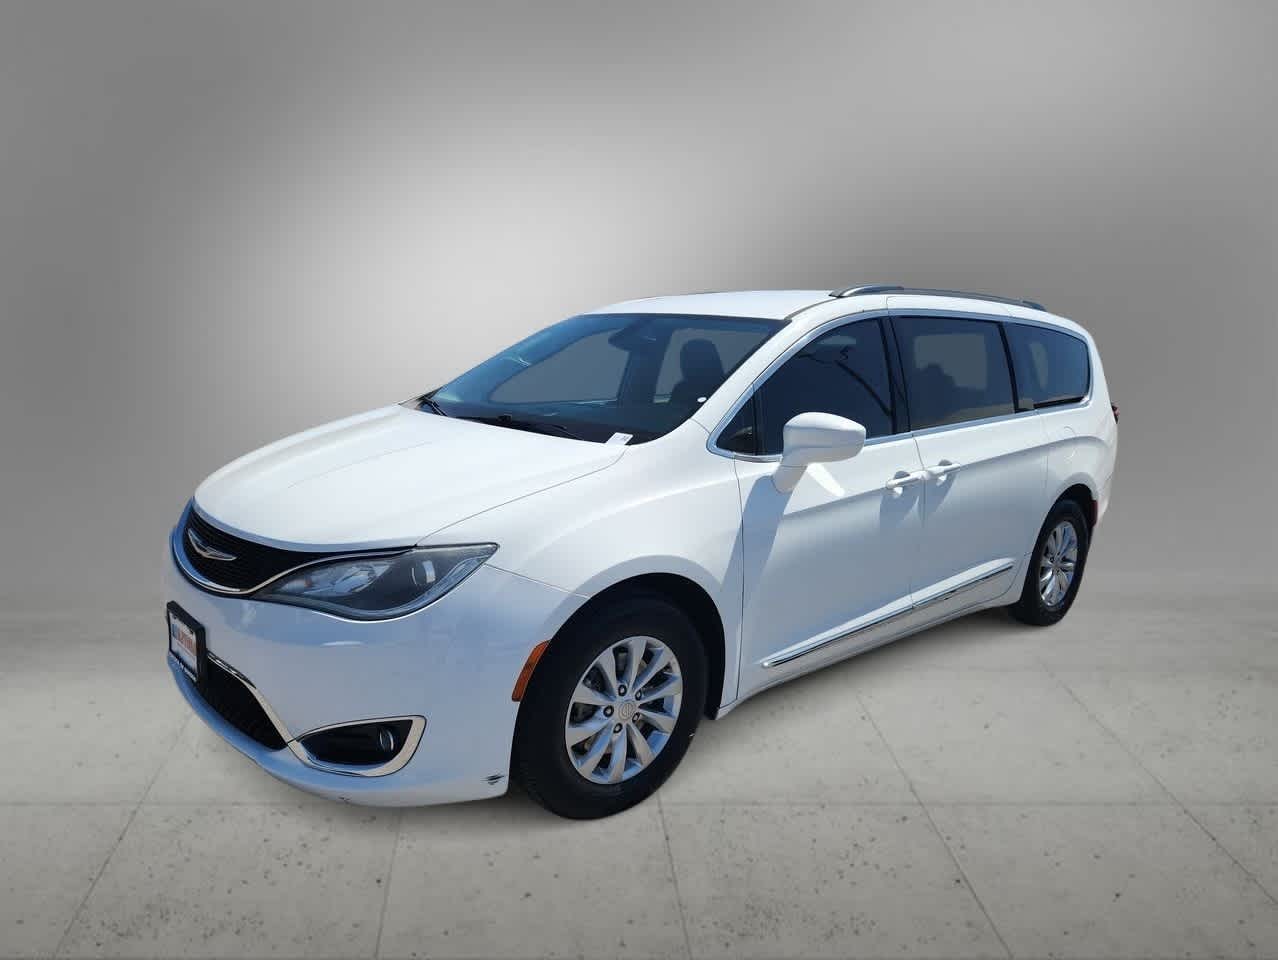 2017 Chrysler Pacifica Touring-L Hero Image